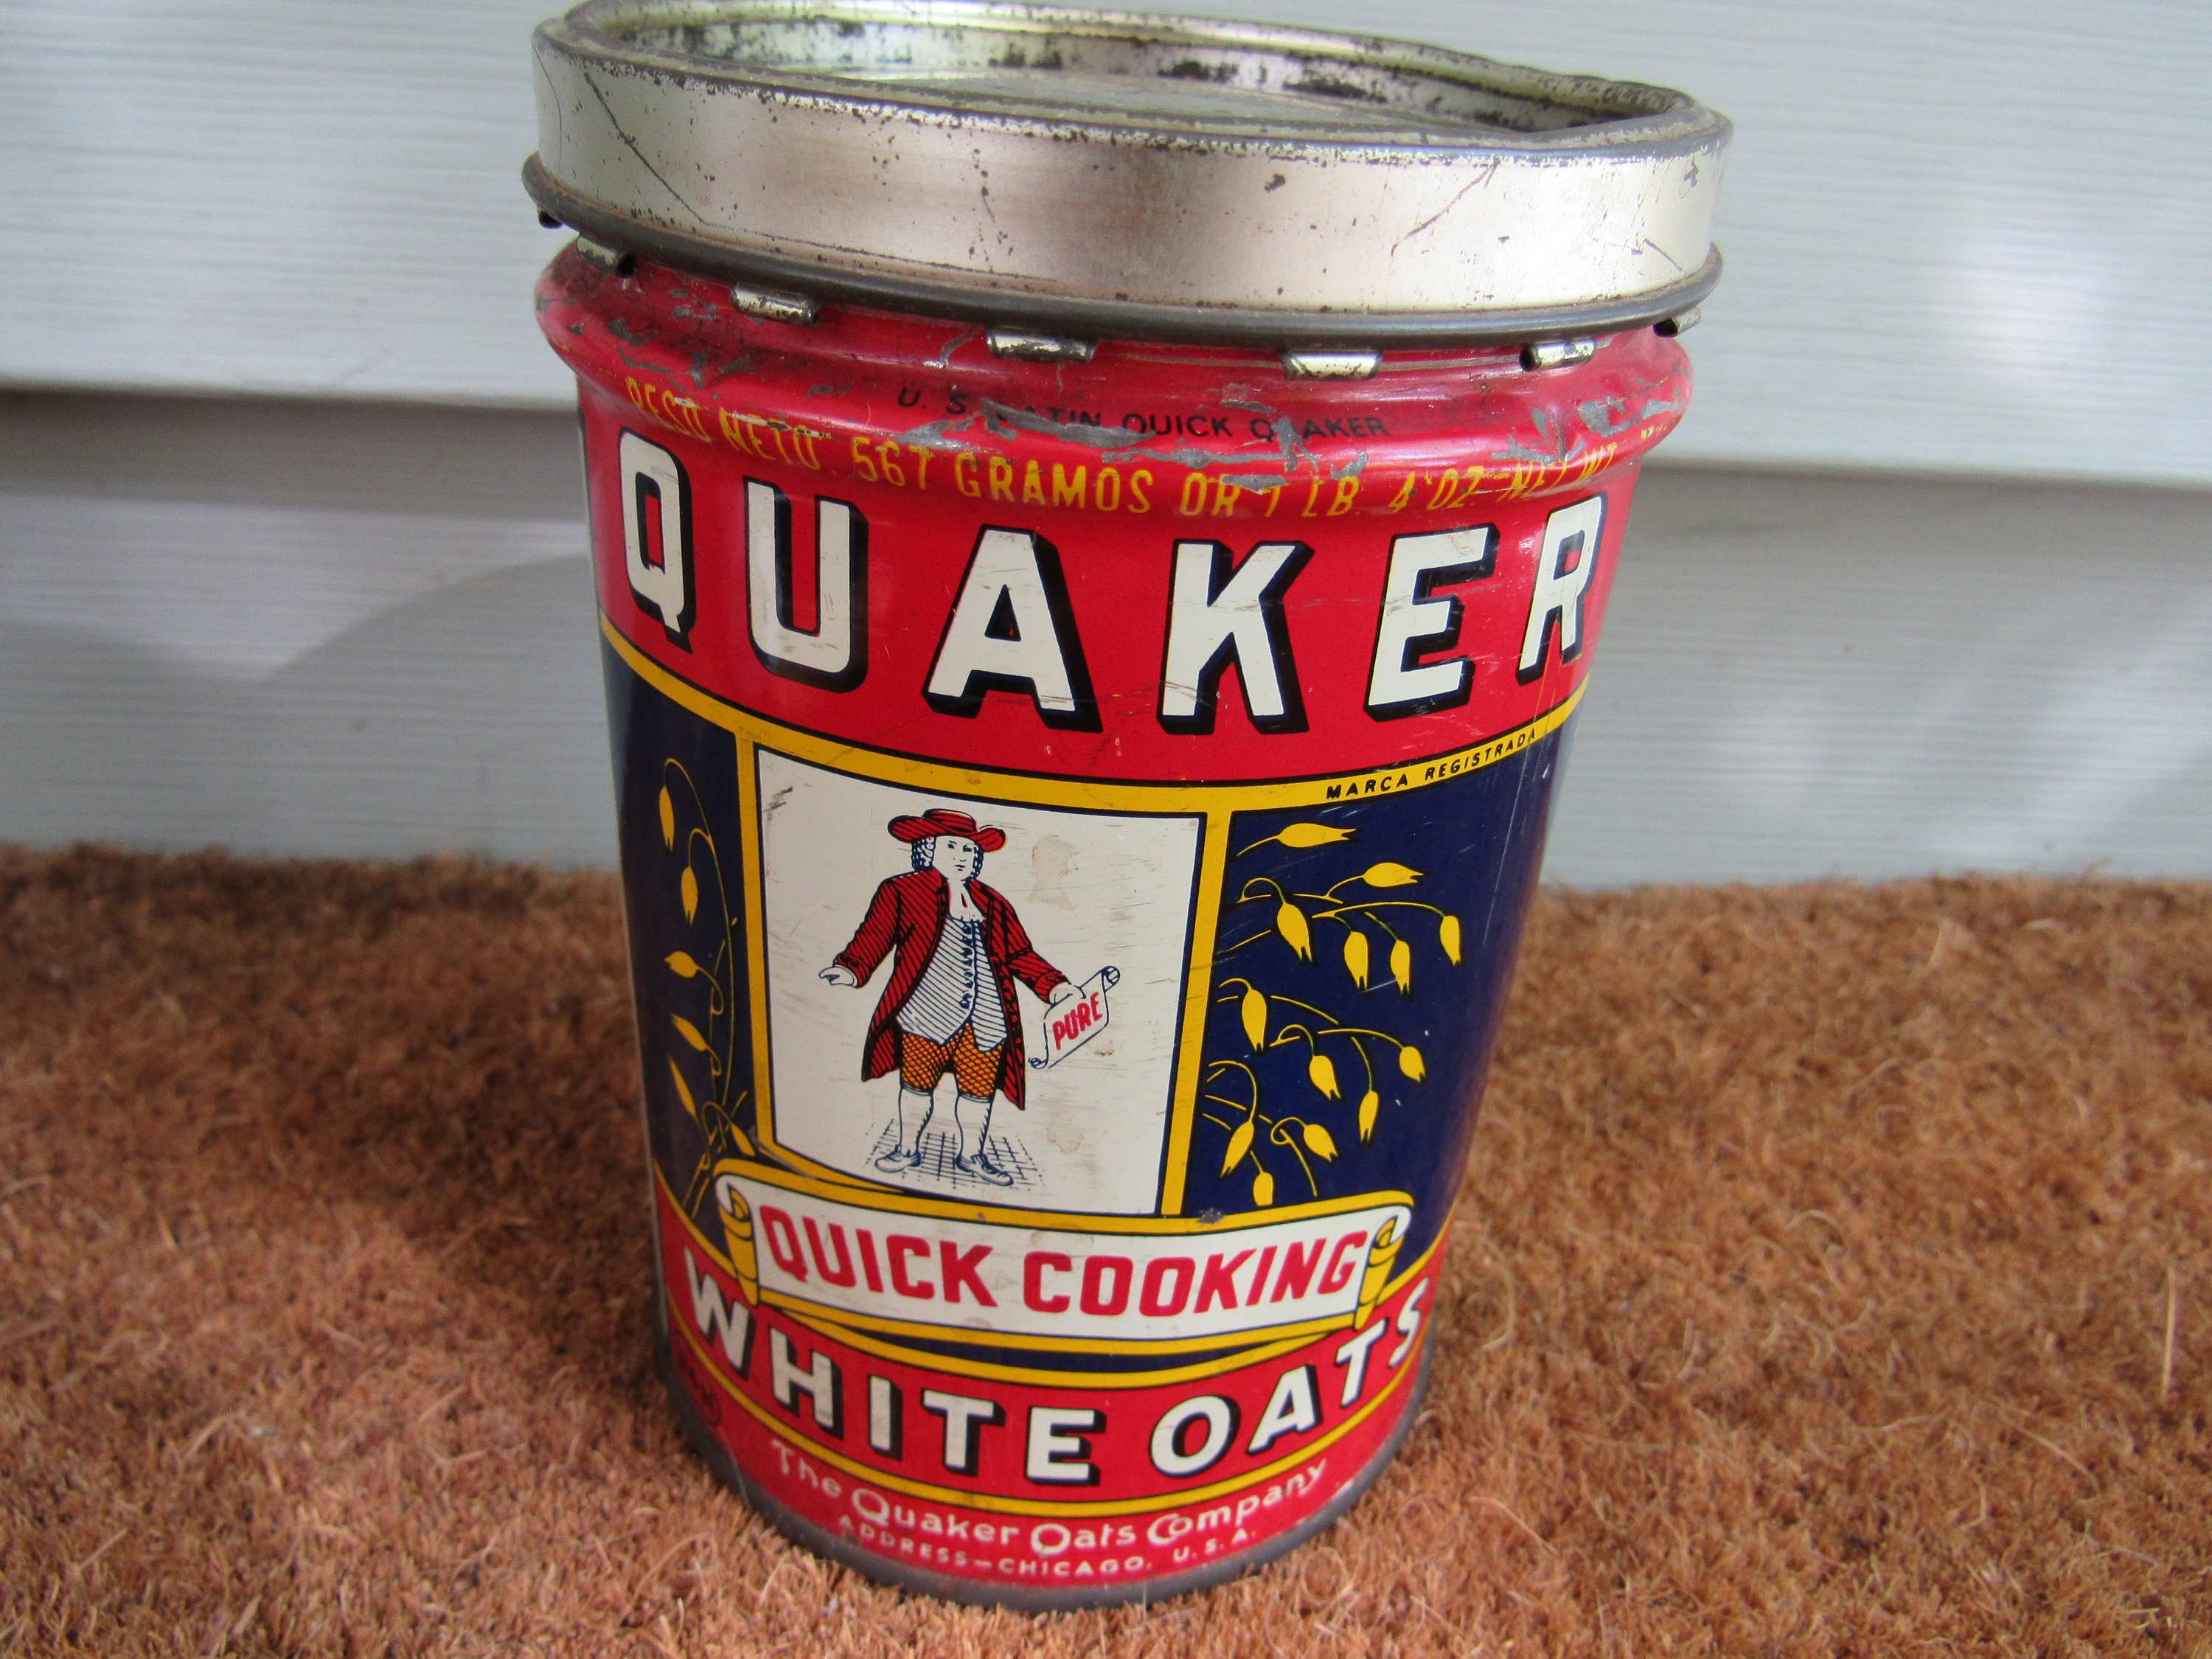 Quick MOTHER'S OATS Cardboard Advertising Container, Quaker Oat's Co. w/  recipes